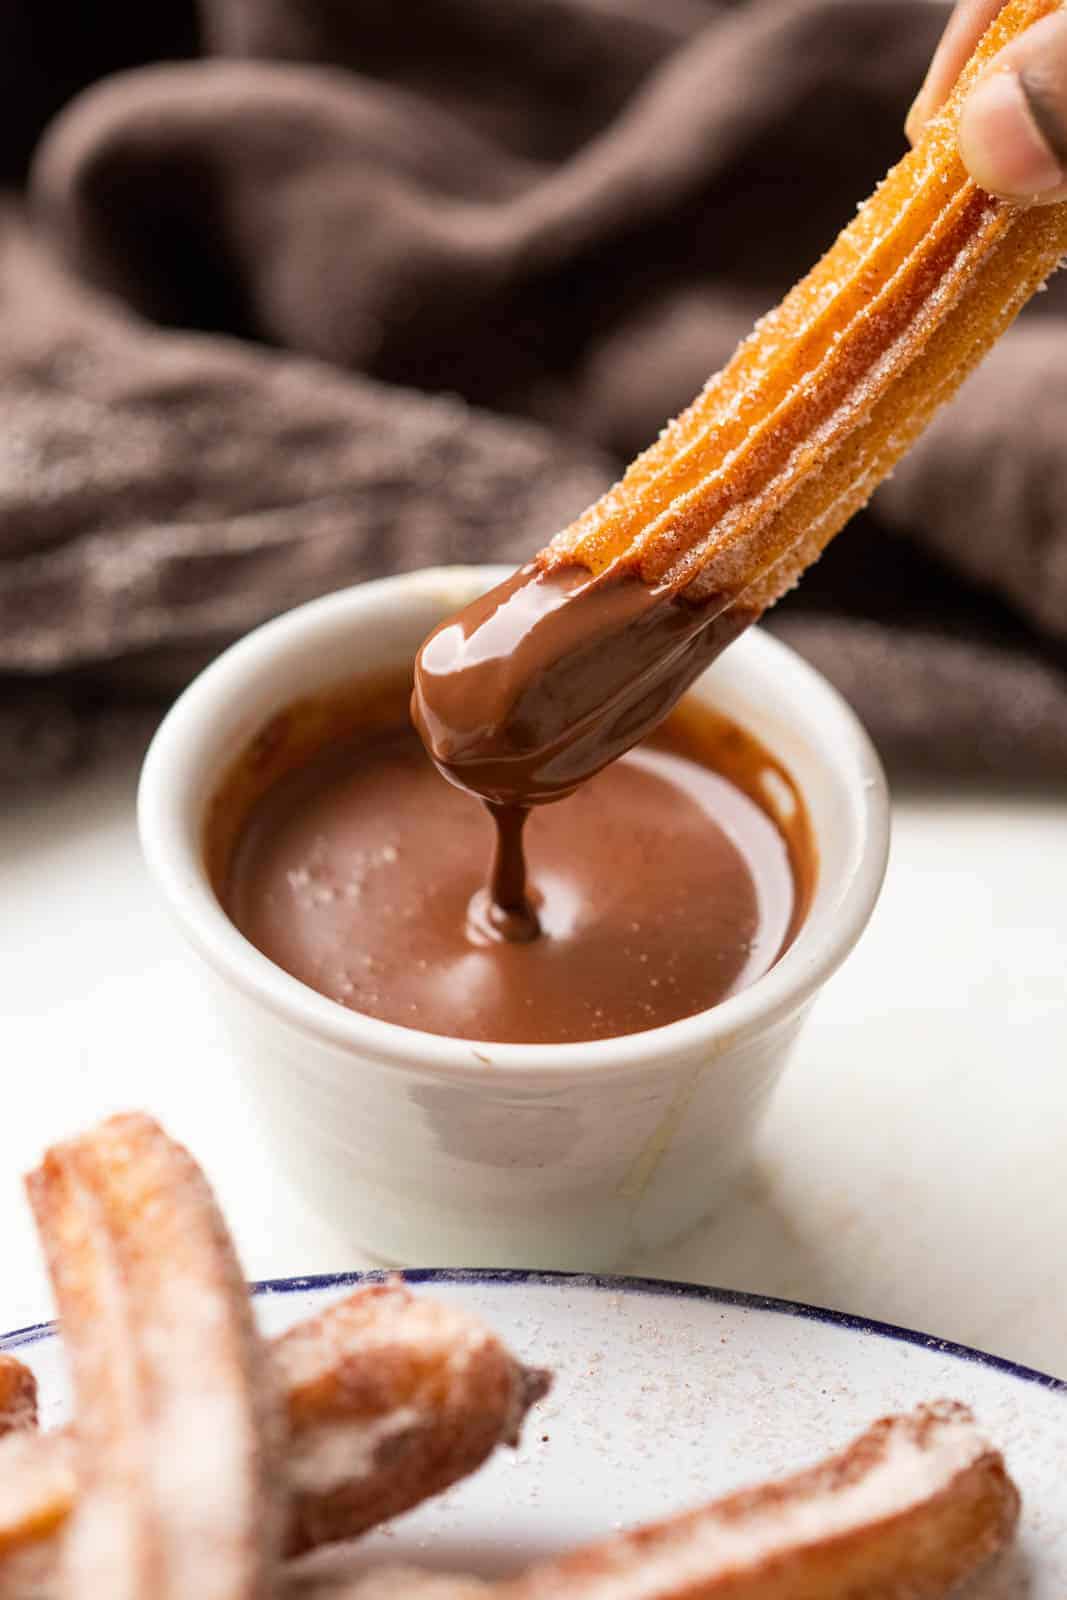 Dipping a churro in chocolate sauce